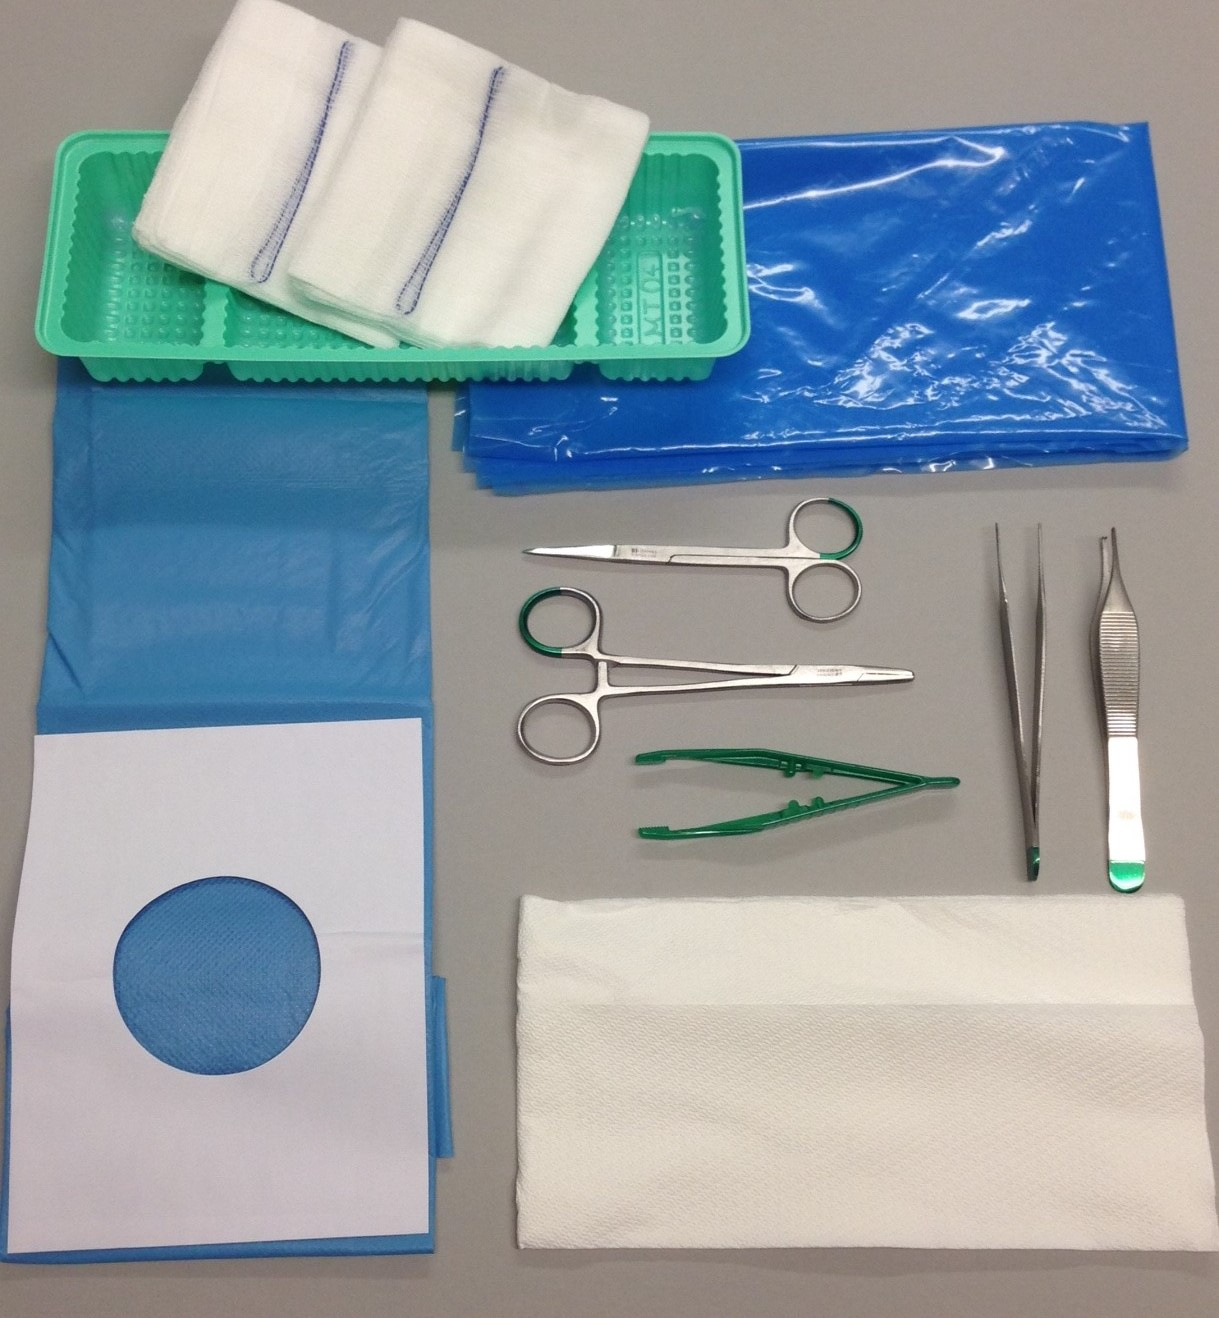 Defries Suture kit with 5 disposable intruments and drapes image 0